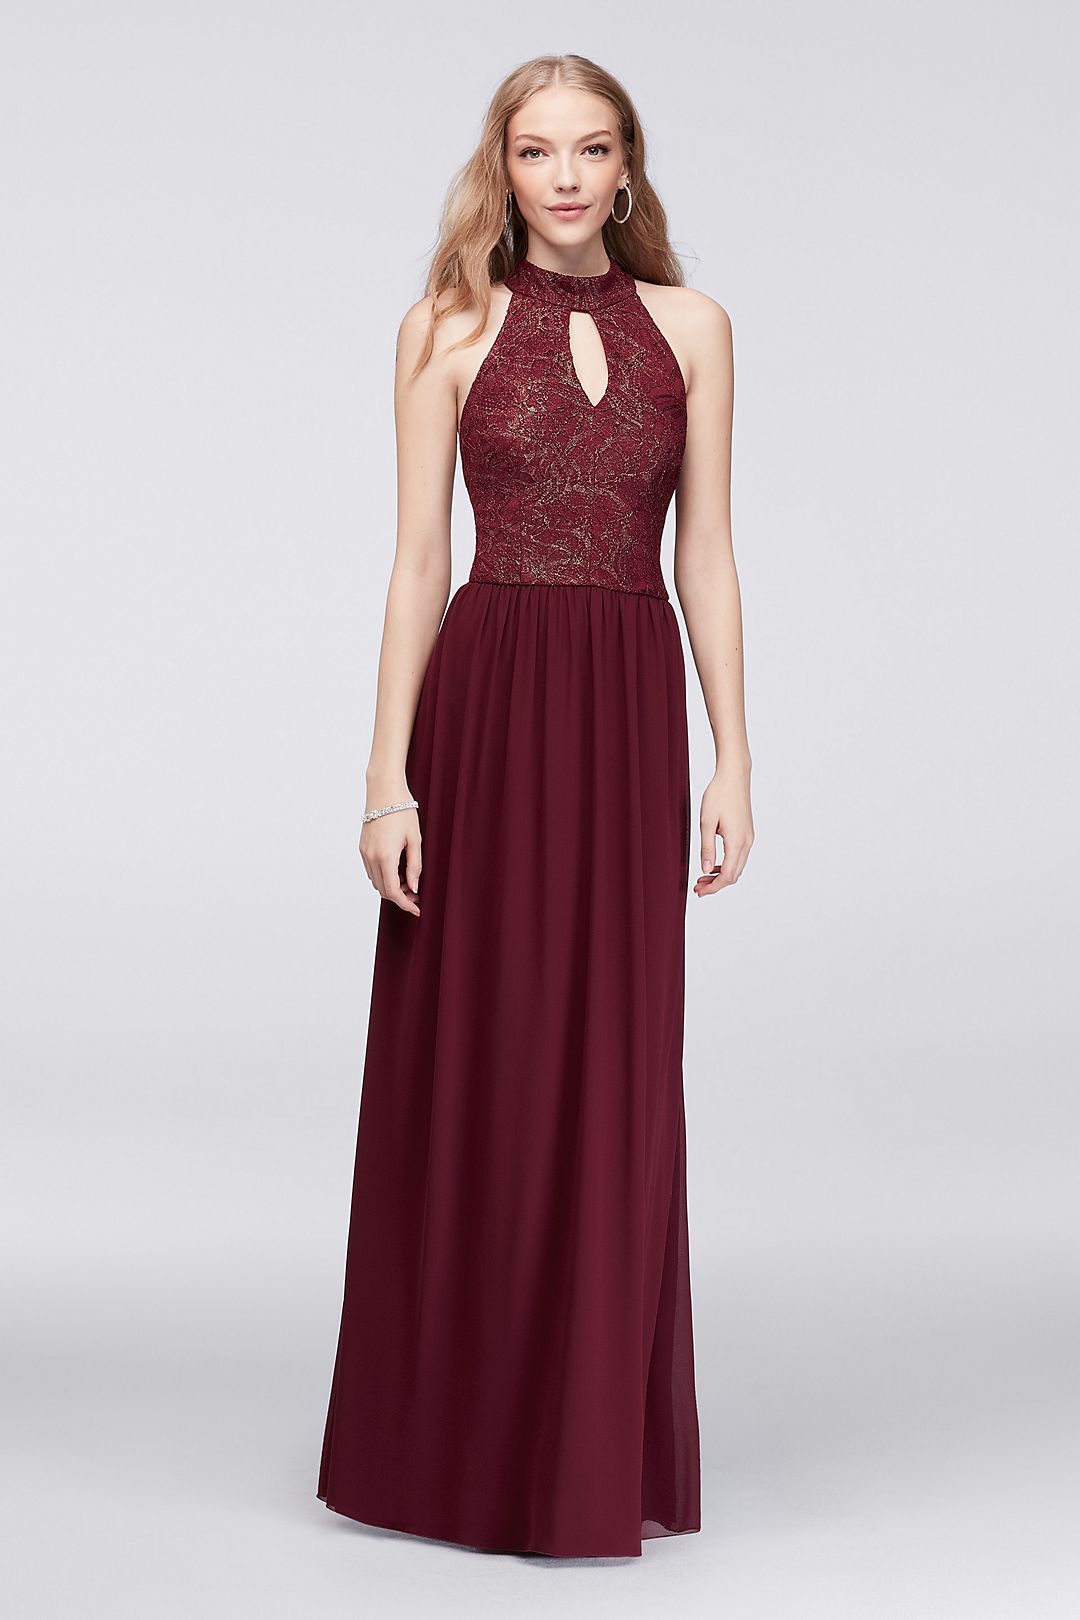 Lace and Chiffon Halter Gown with Back Detail Image 4